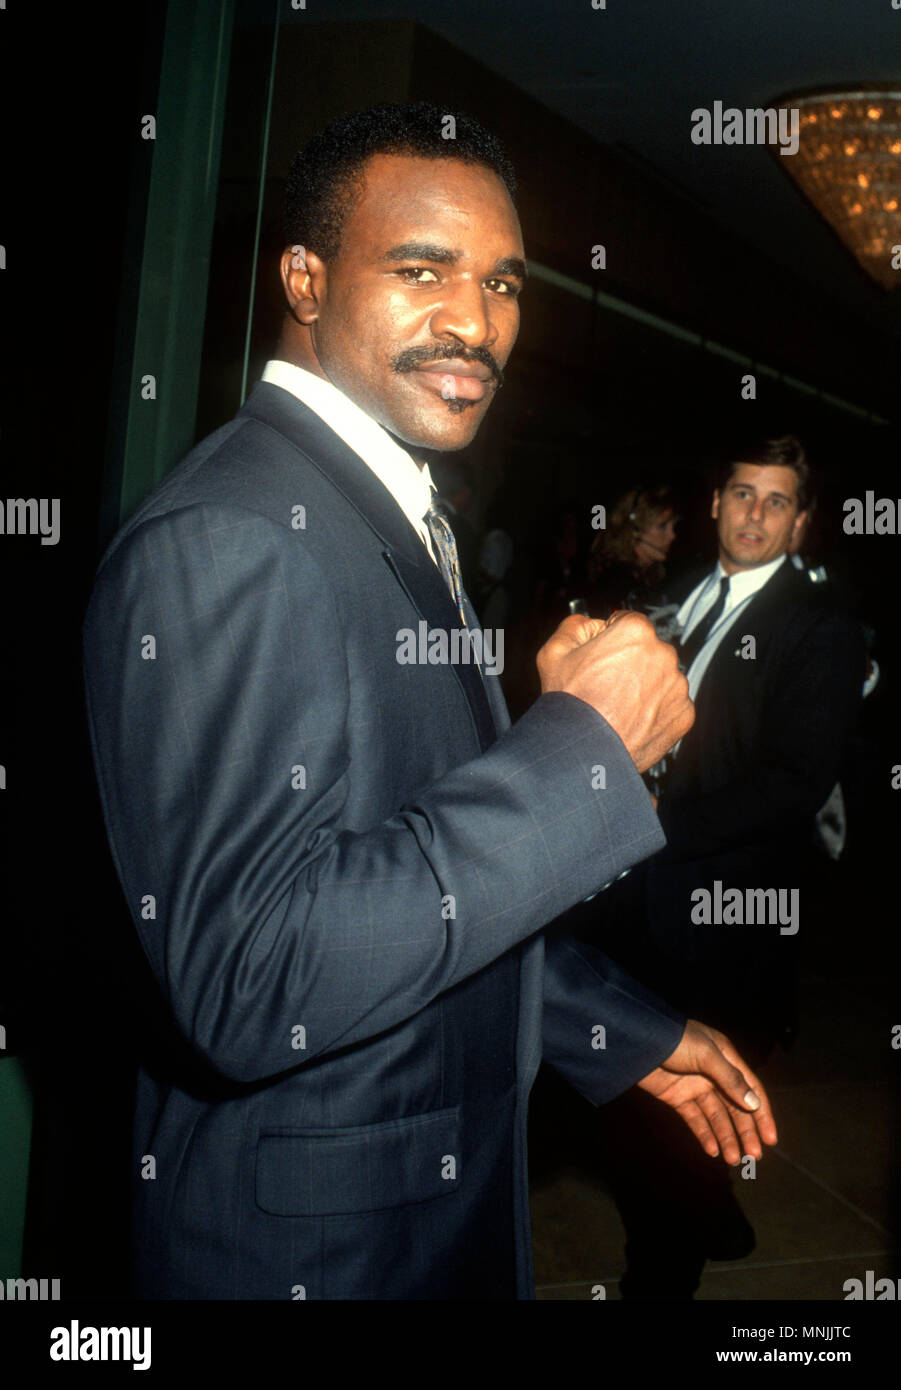 BEVERLY HILLS, CA - OCTOBER 26: Fighter Evander Holyfield attends the 1990 Carousel Ball of Hope to Benefit the Barbara Davis Center for Childhood Diabetes on October 26,1990 at the Beverly Hilton Hotel in Beverly Hills, California. Photo by Barry King/Alamy Stock Photo Stock Photo